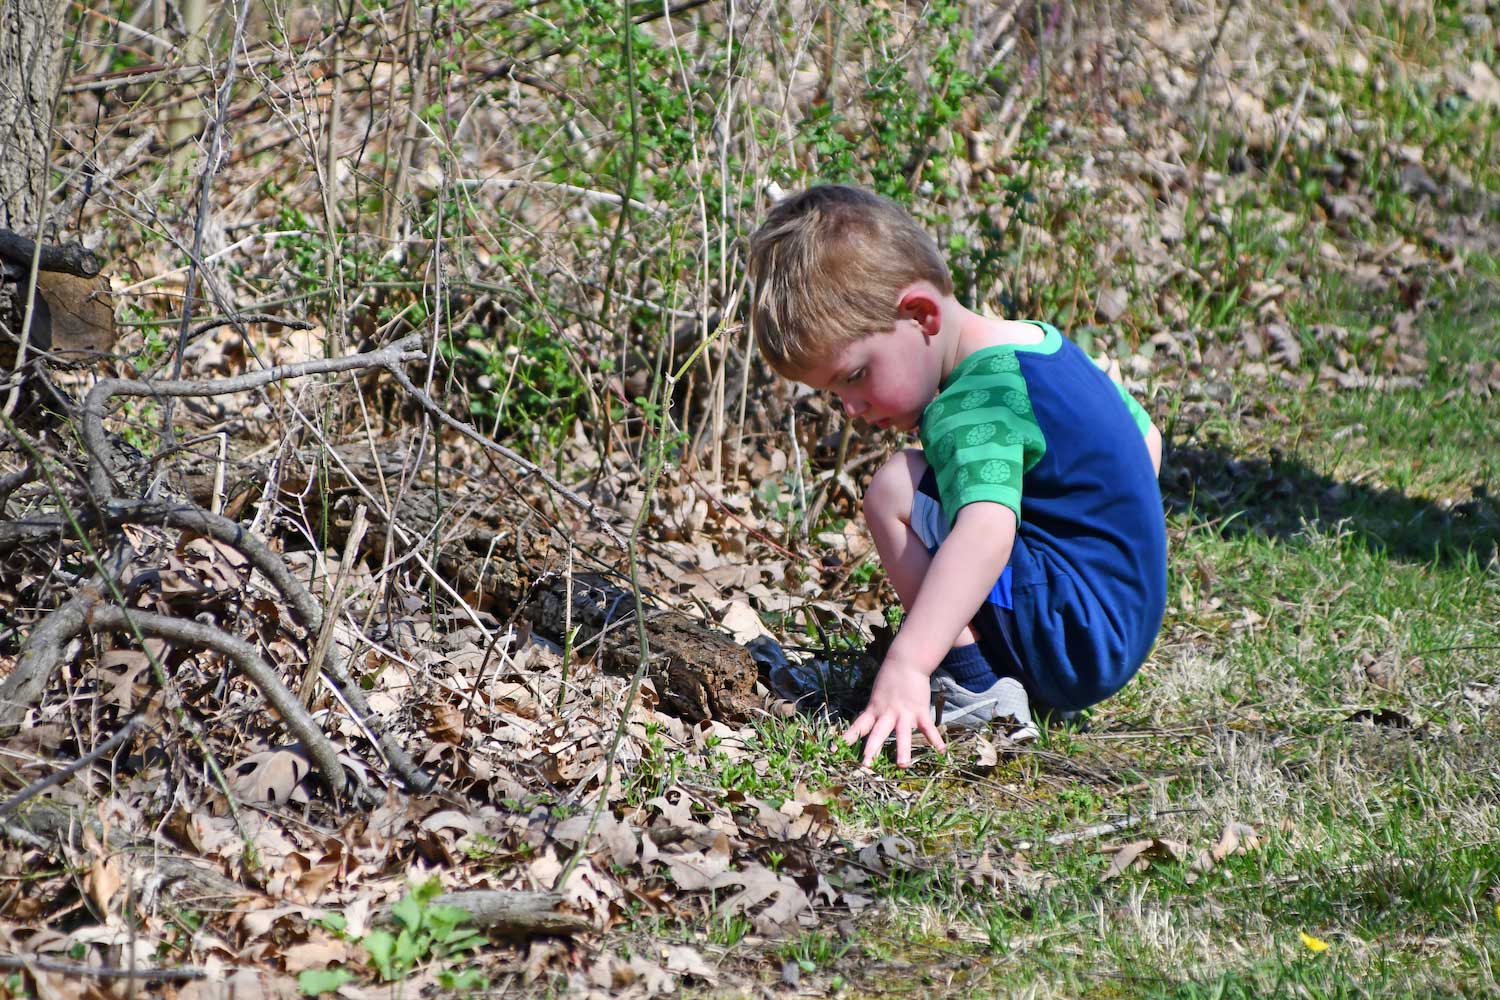 A child kneeling on the ground examining the grass and plants.